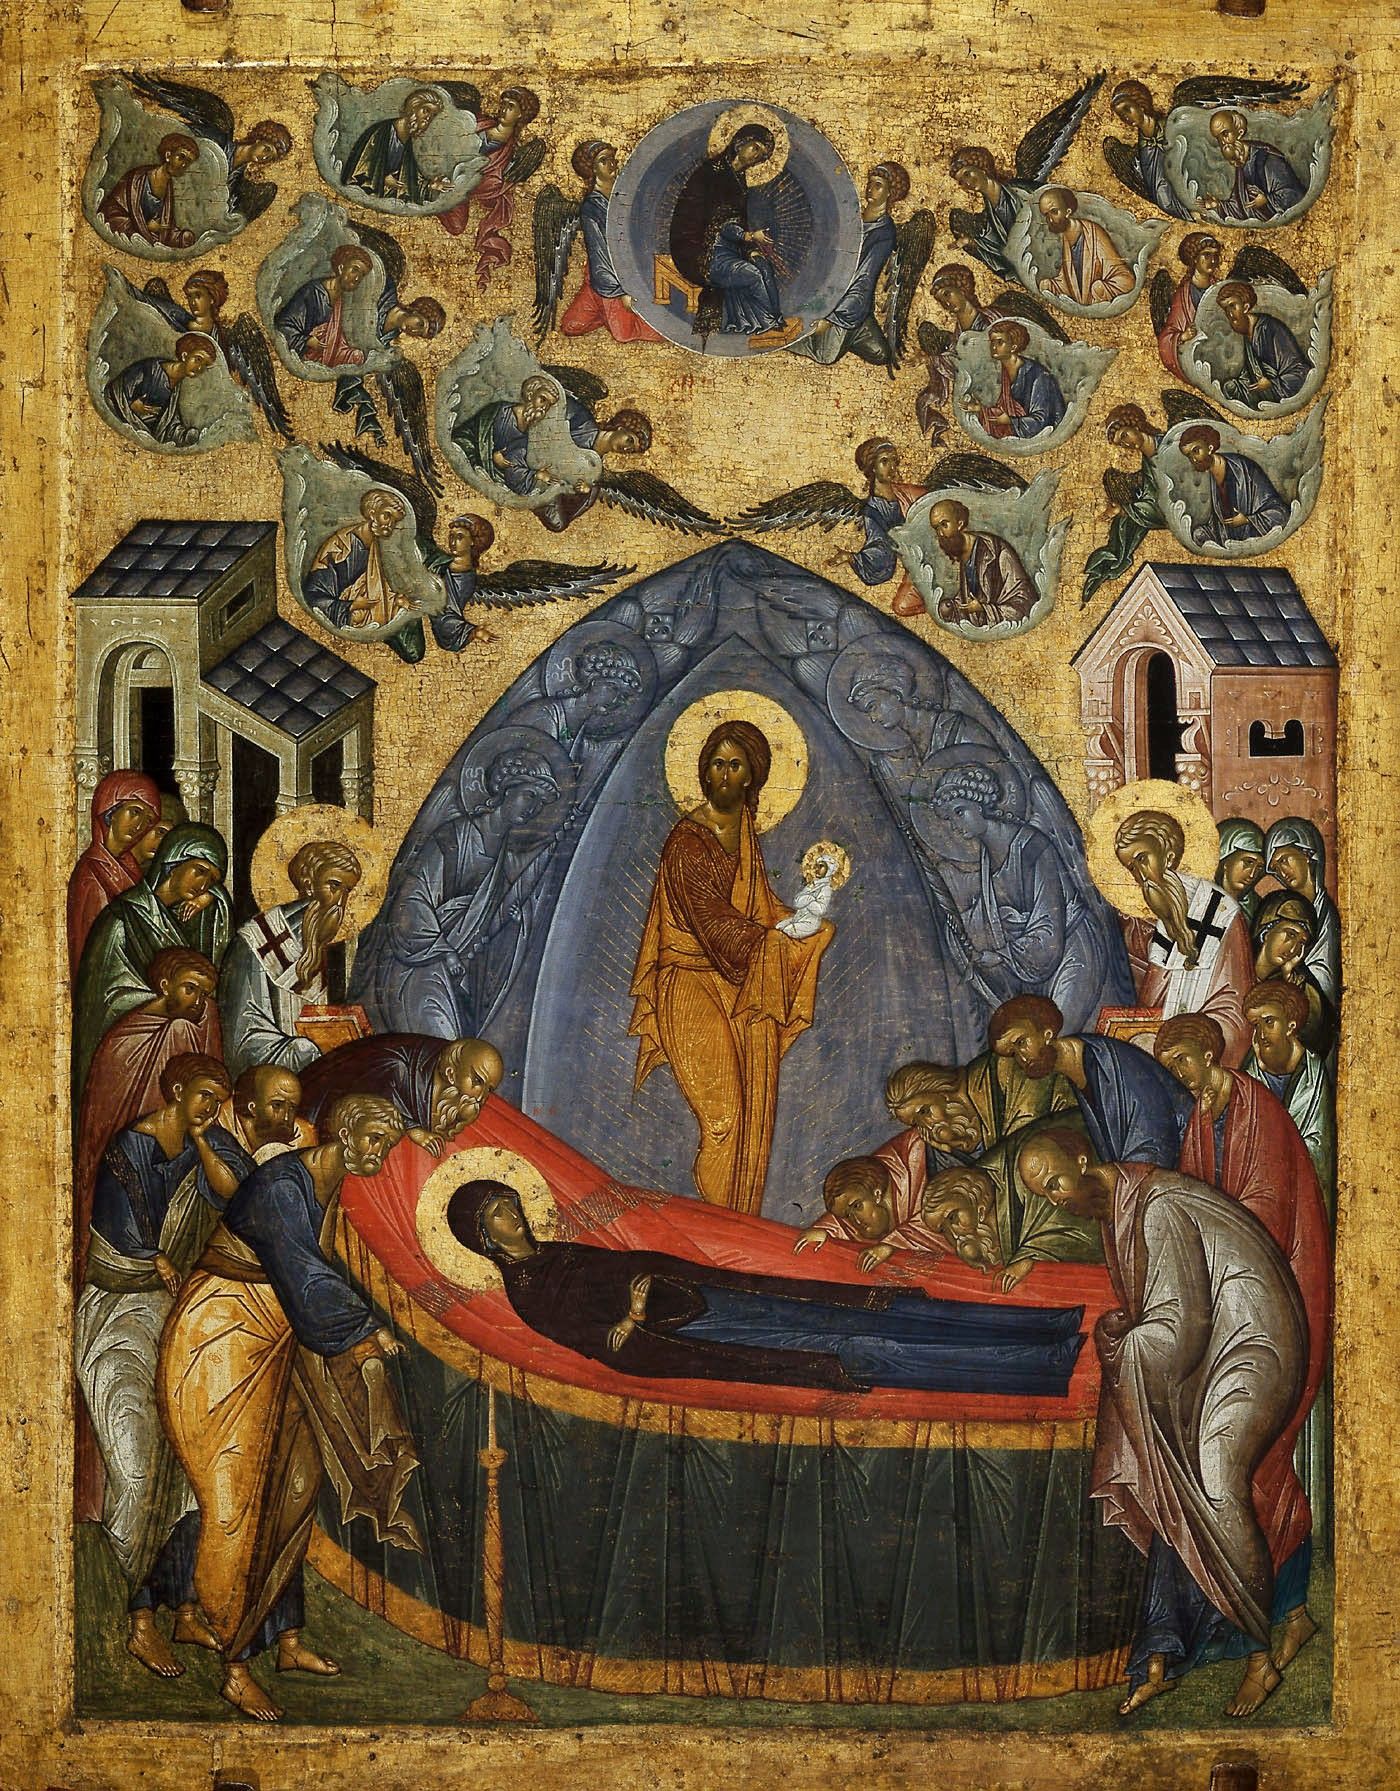 The Crown of Christ's Work - A Sermon for the Dormition of Our Most Holy Lady Theotokos (2021)